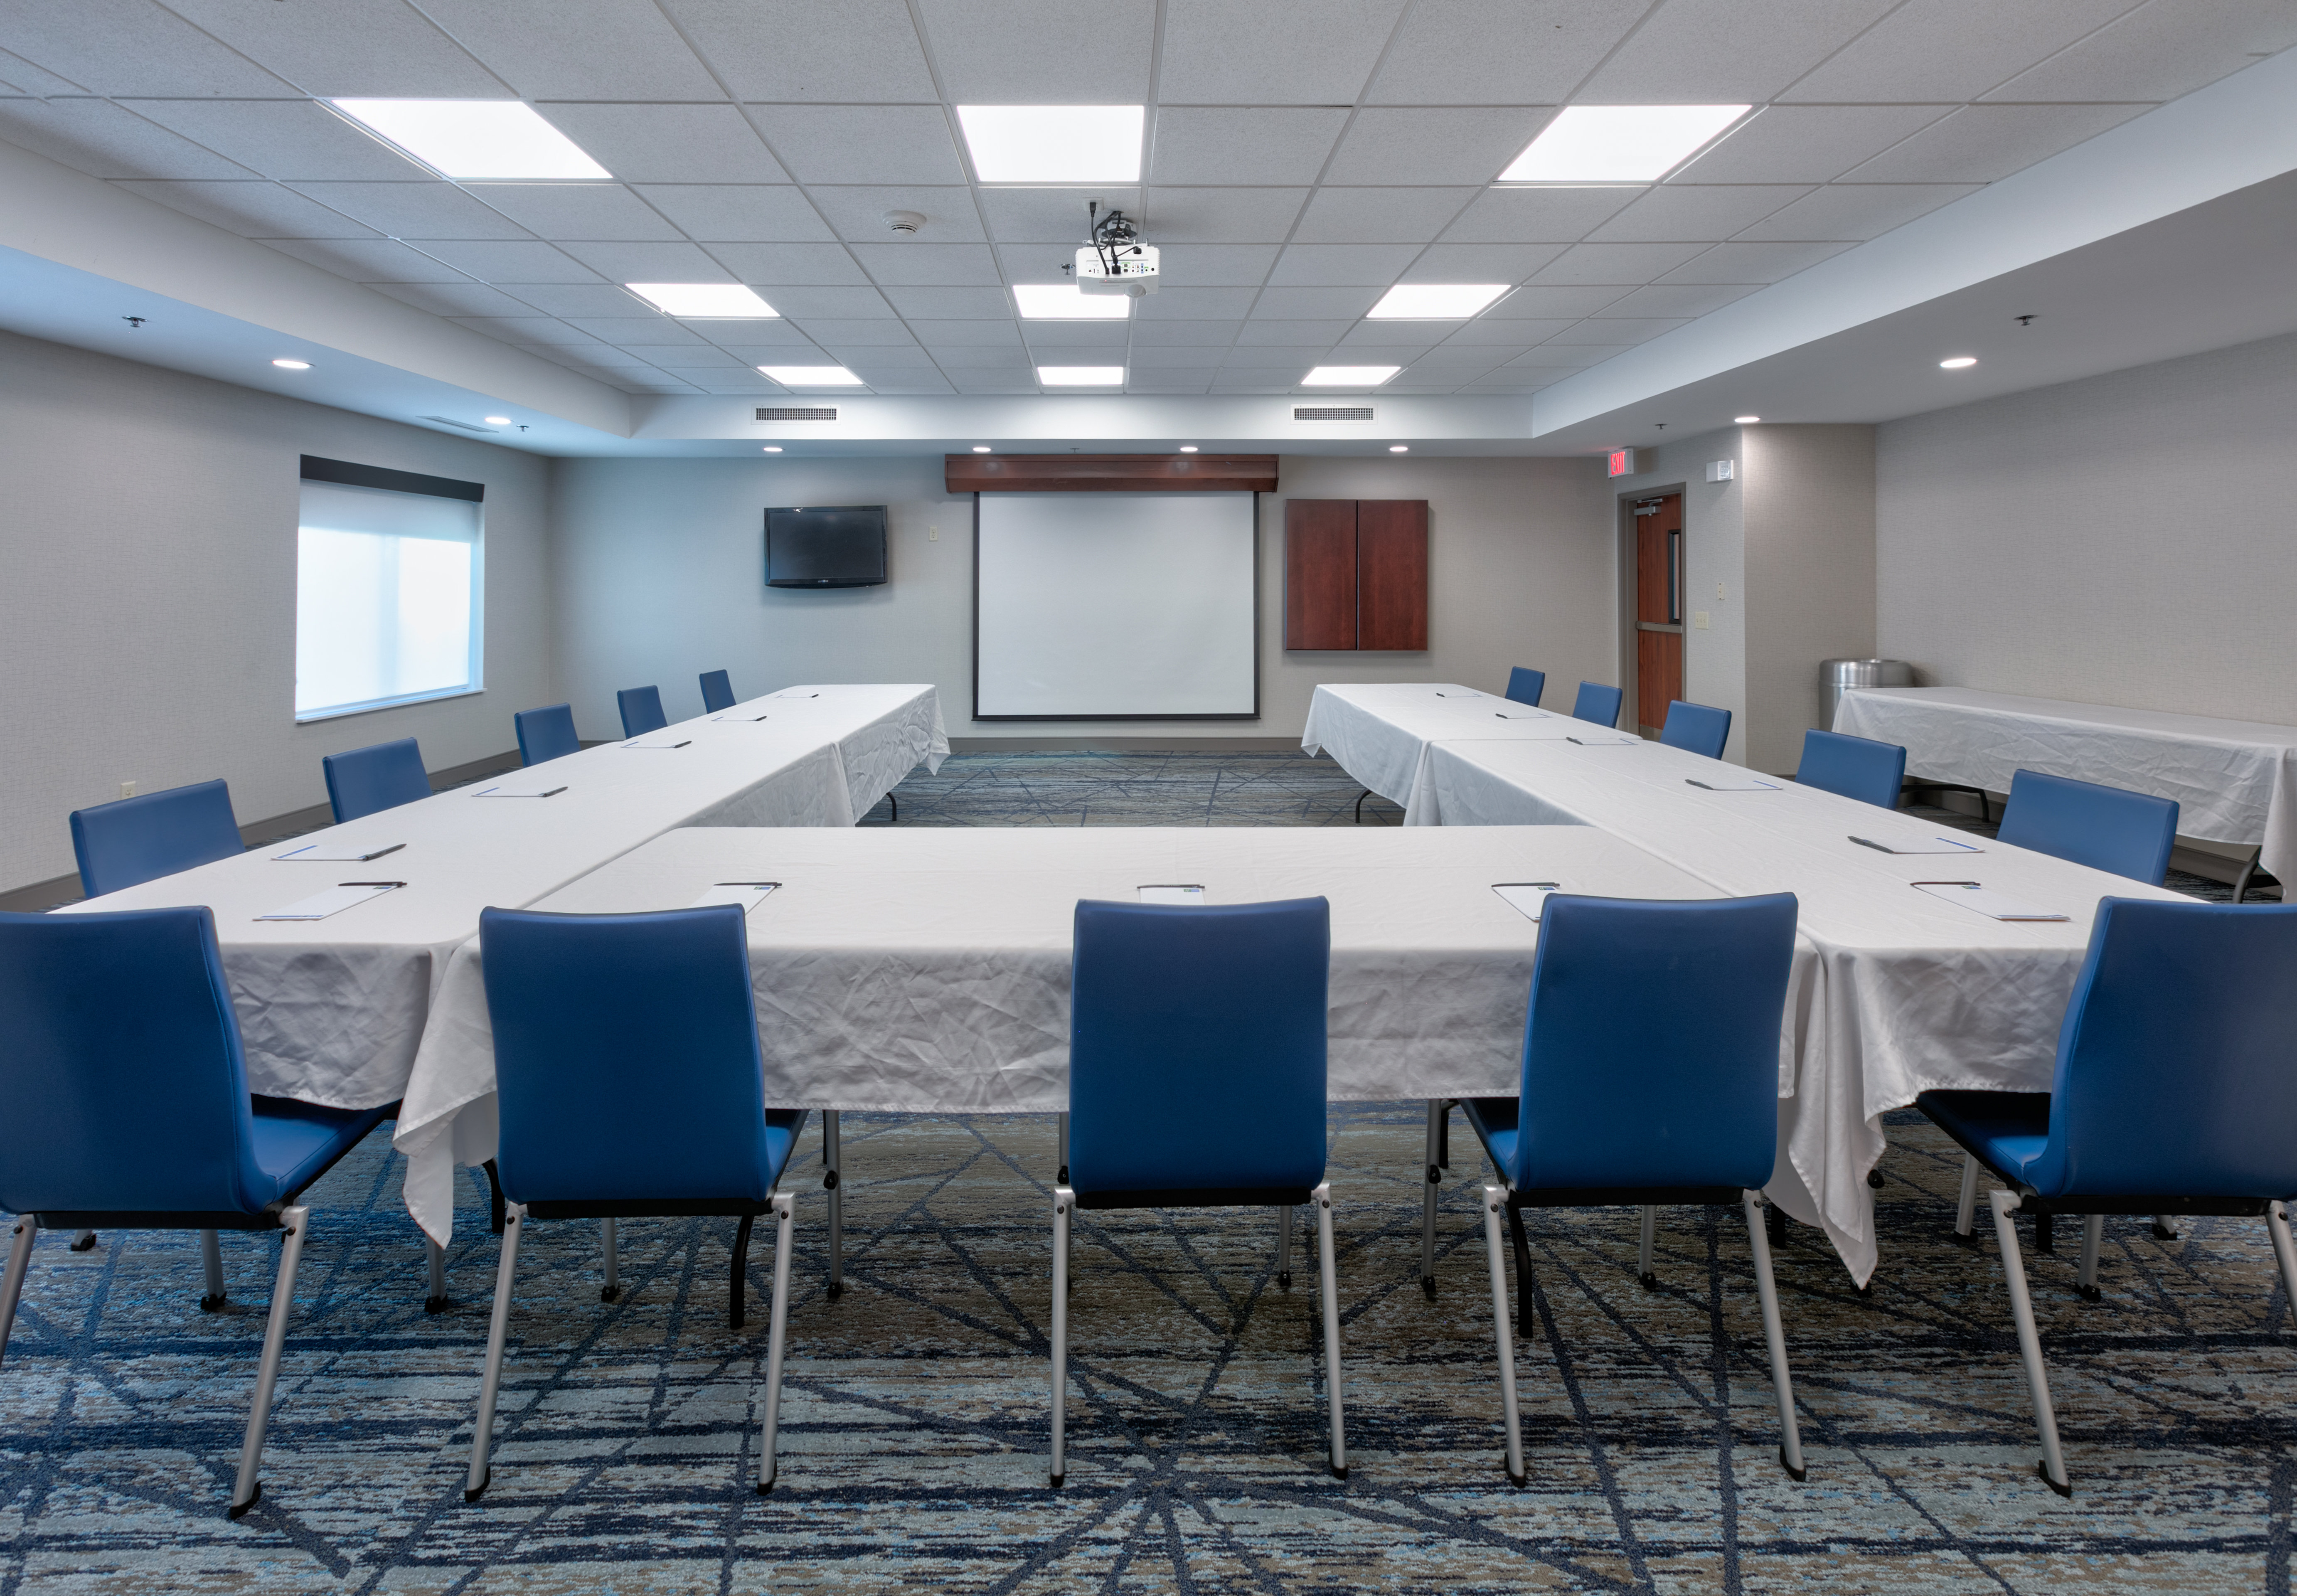 Let us take care of your corporate meeting needs! Seating up to 50